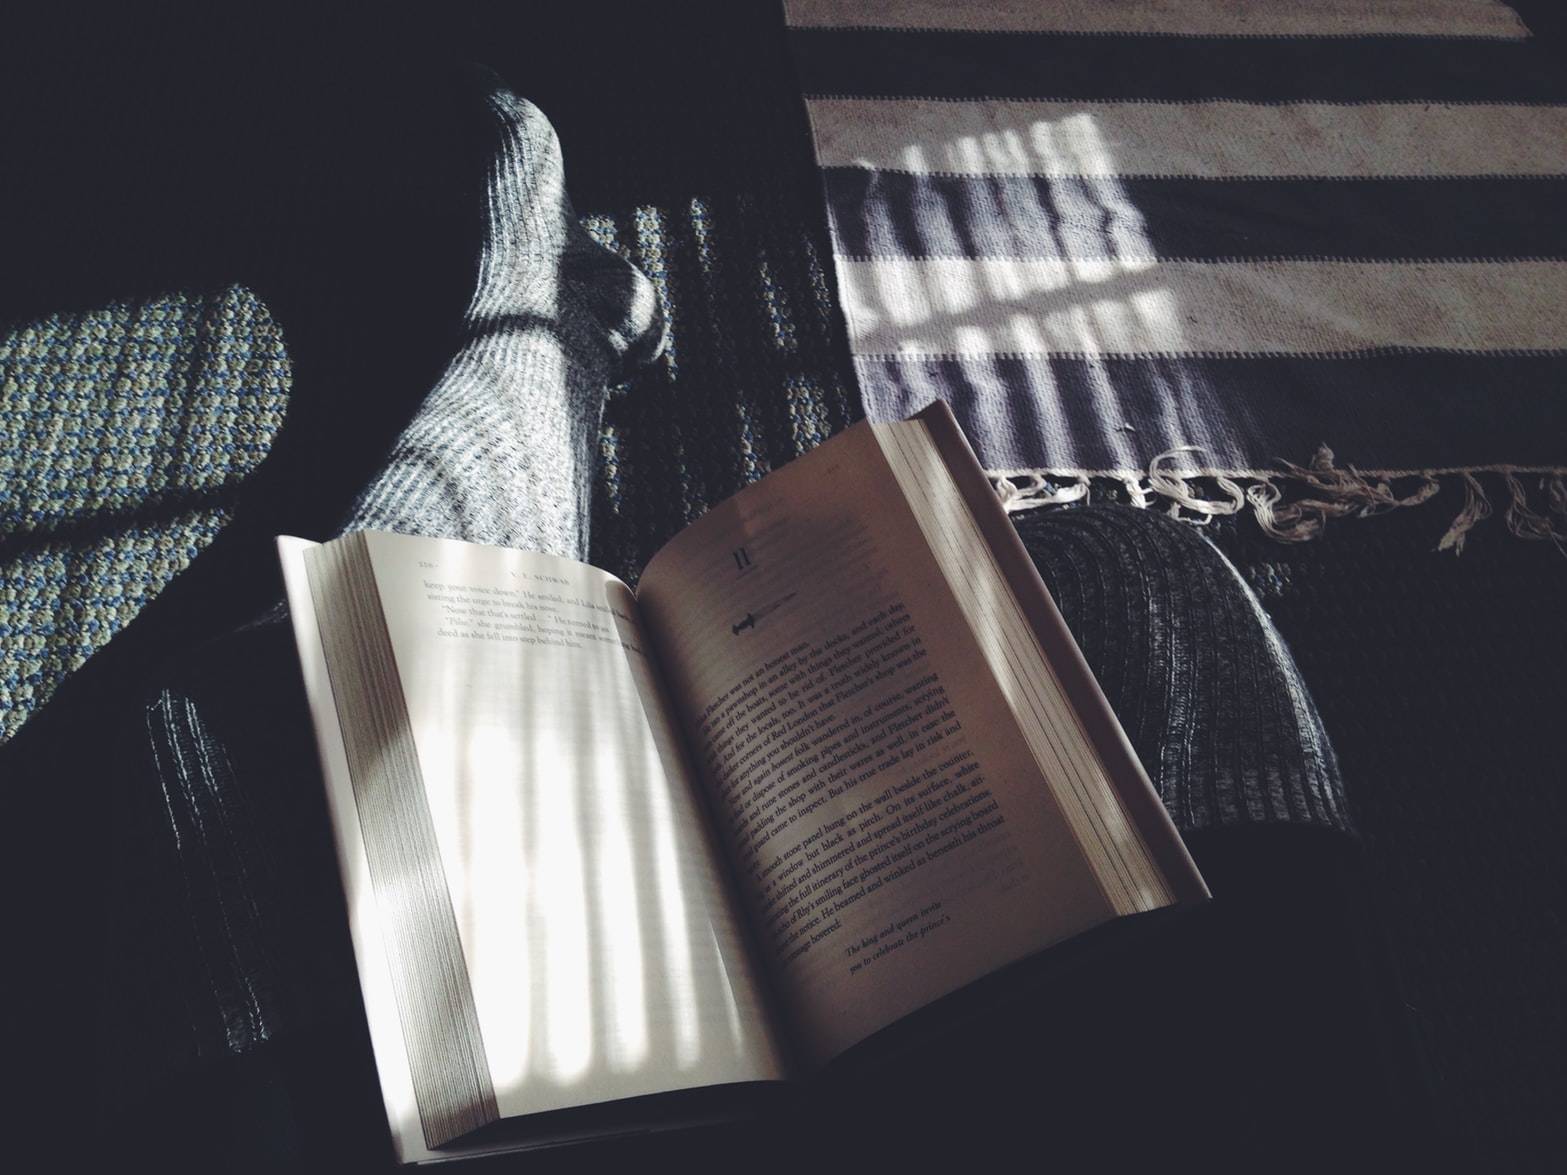 Book and legs